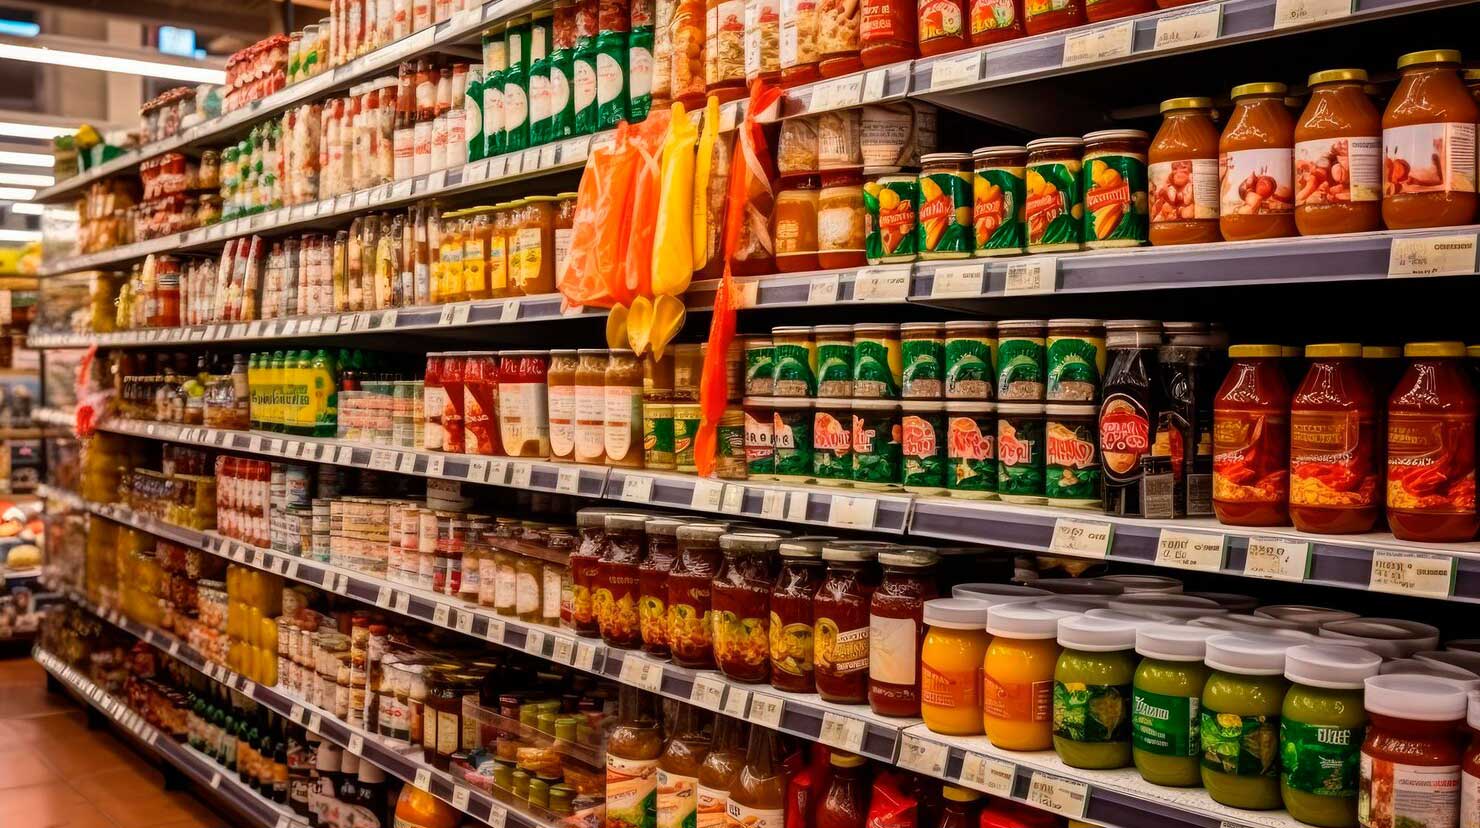 lanes-shelves-with-goods-products-inside-supermarket-variety-preserves-pasta-shelves